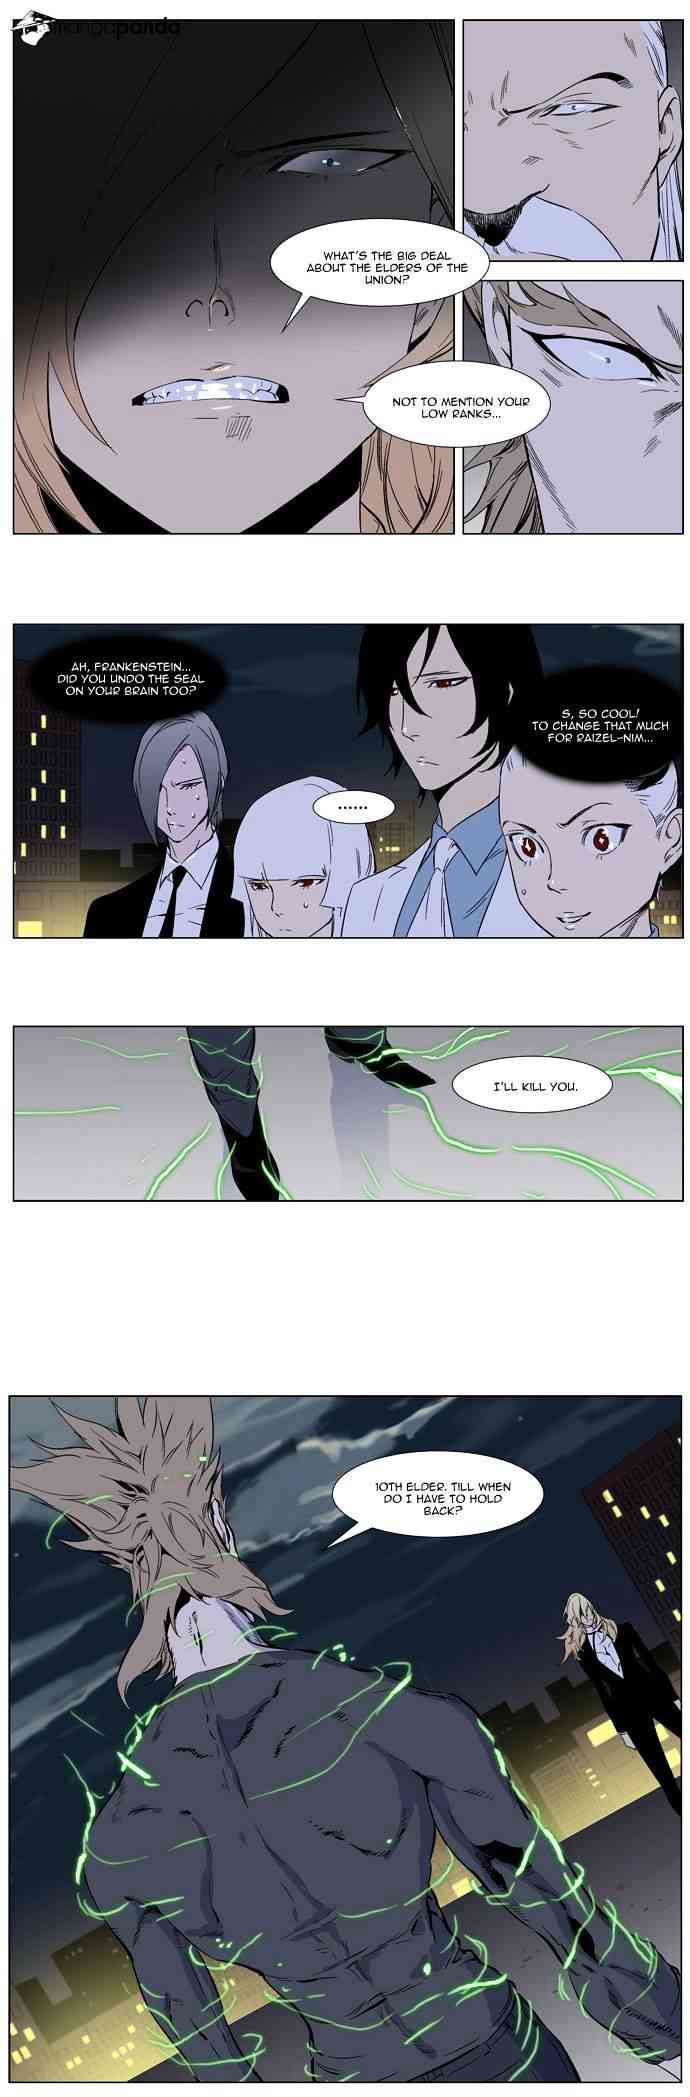 Noblesse Chapter 257 _ Volume 2 Ch 49 page 10